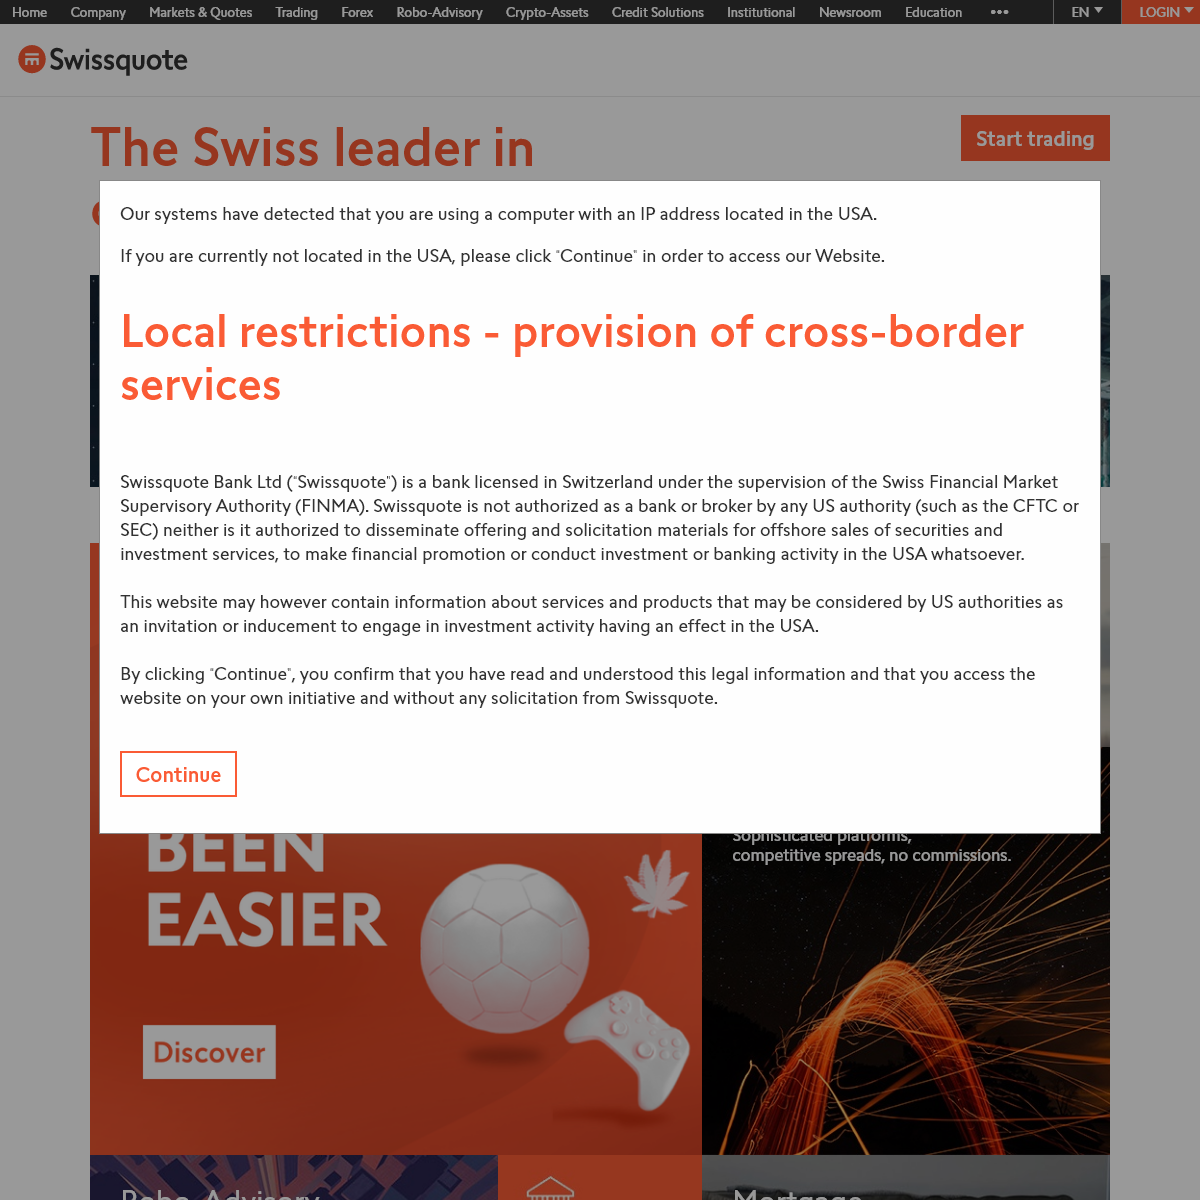 A complete backup of swissquote.com